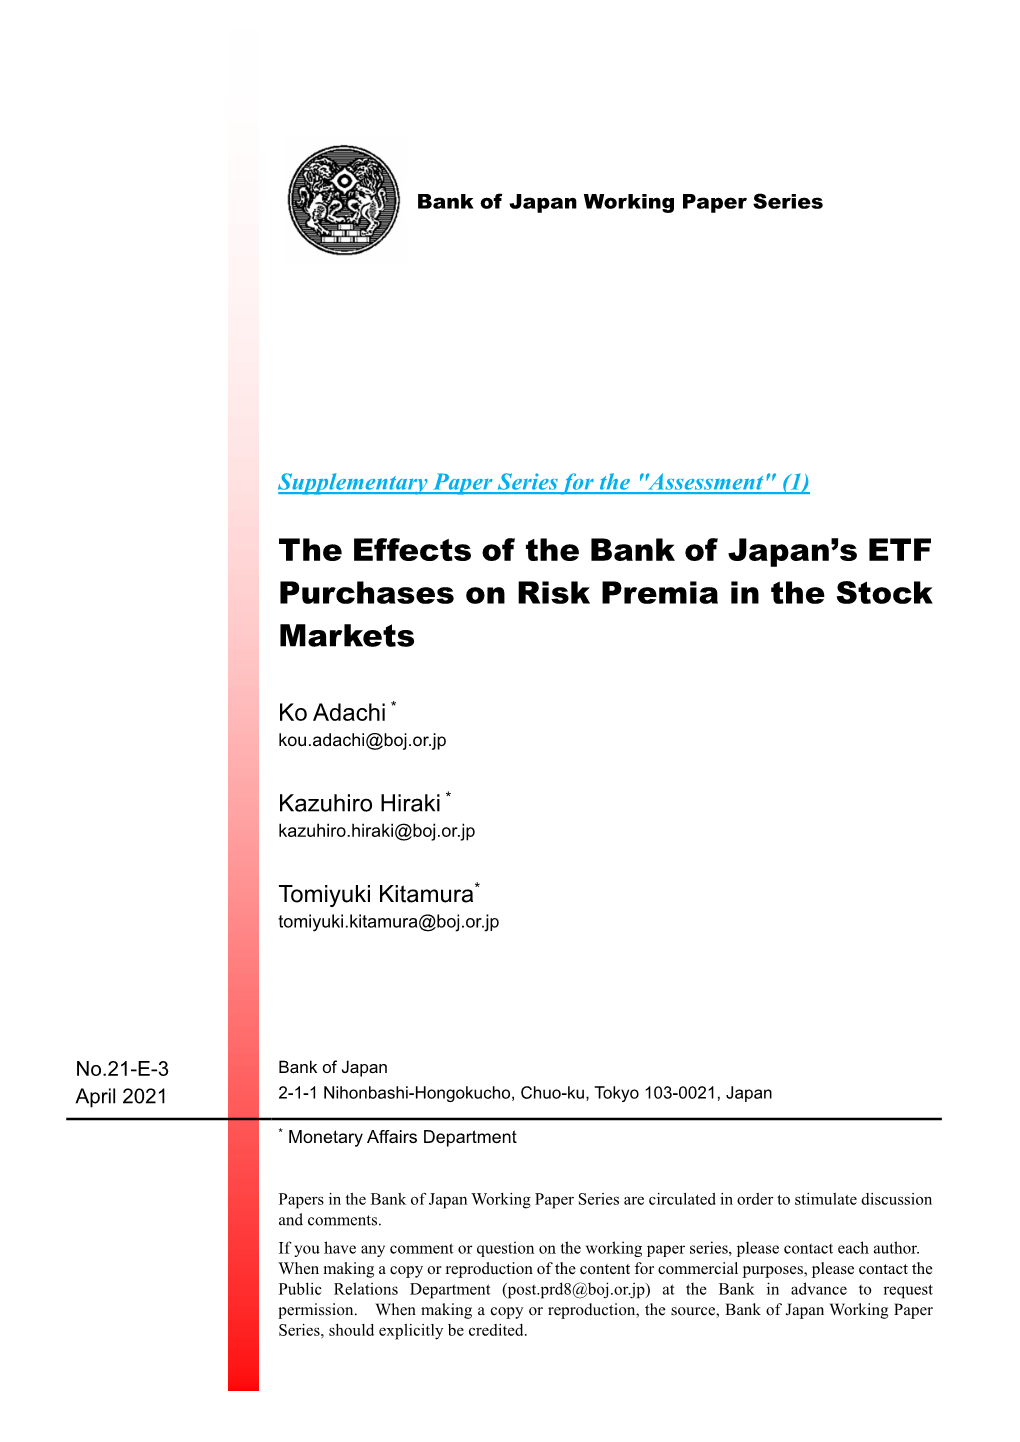 The Effects of the Bank of Japan's ETF Purchases on Risk Prem